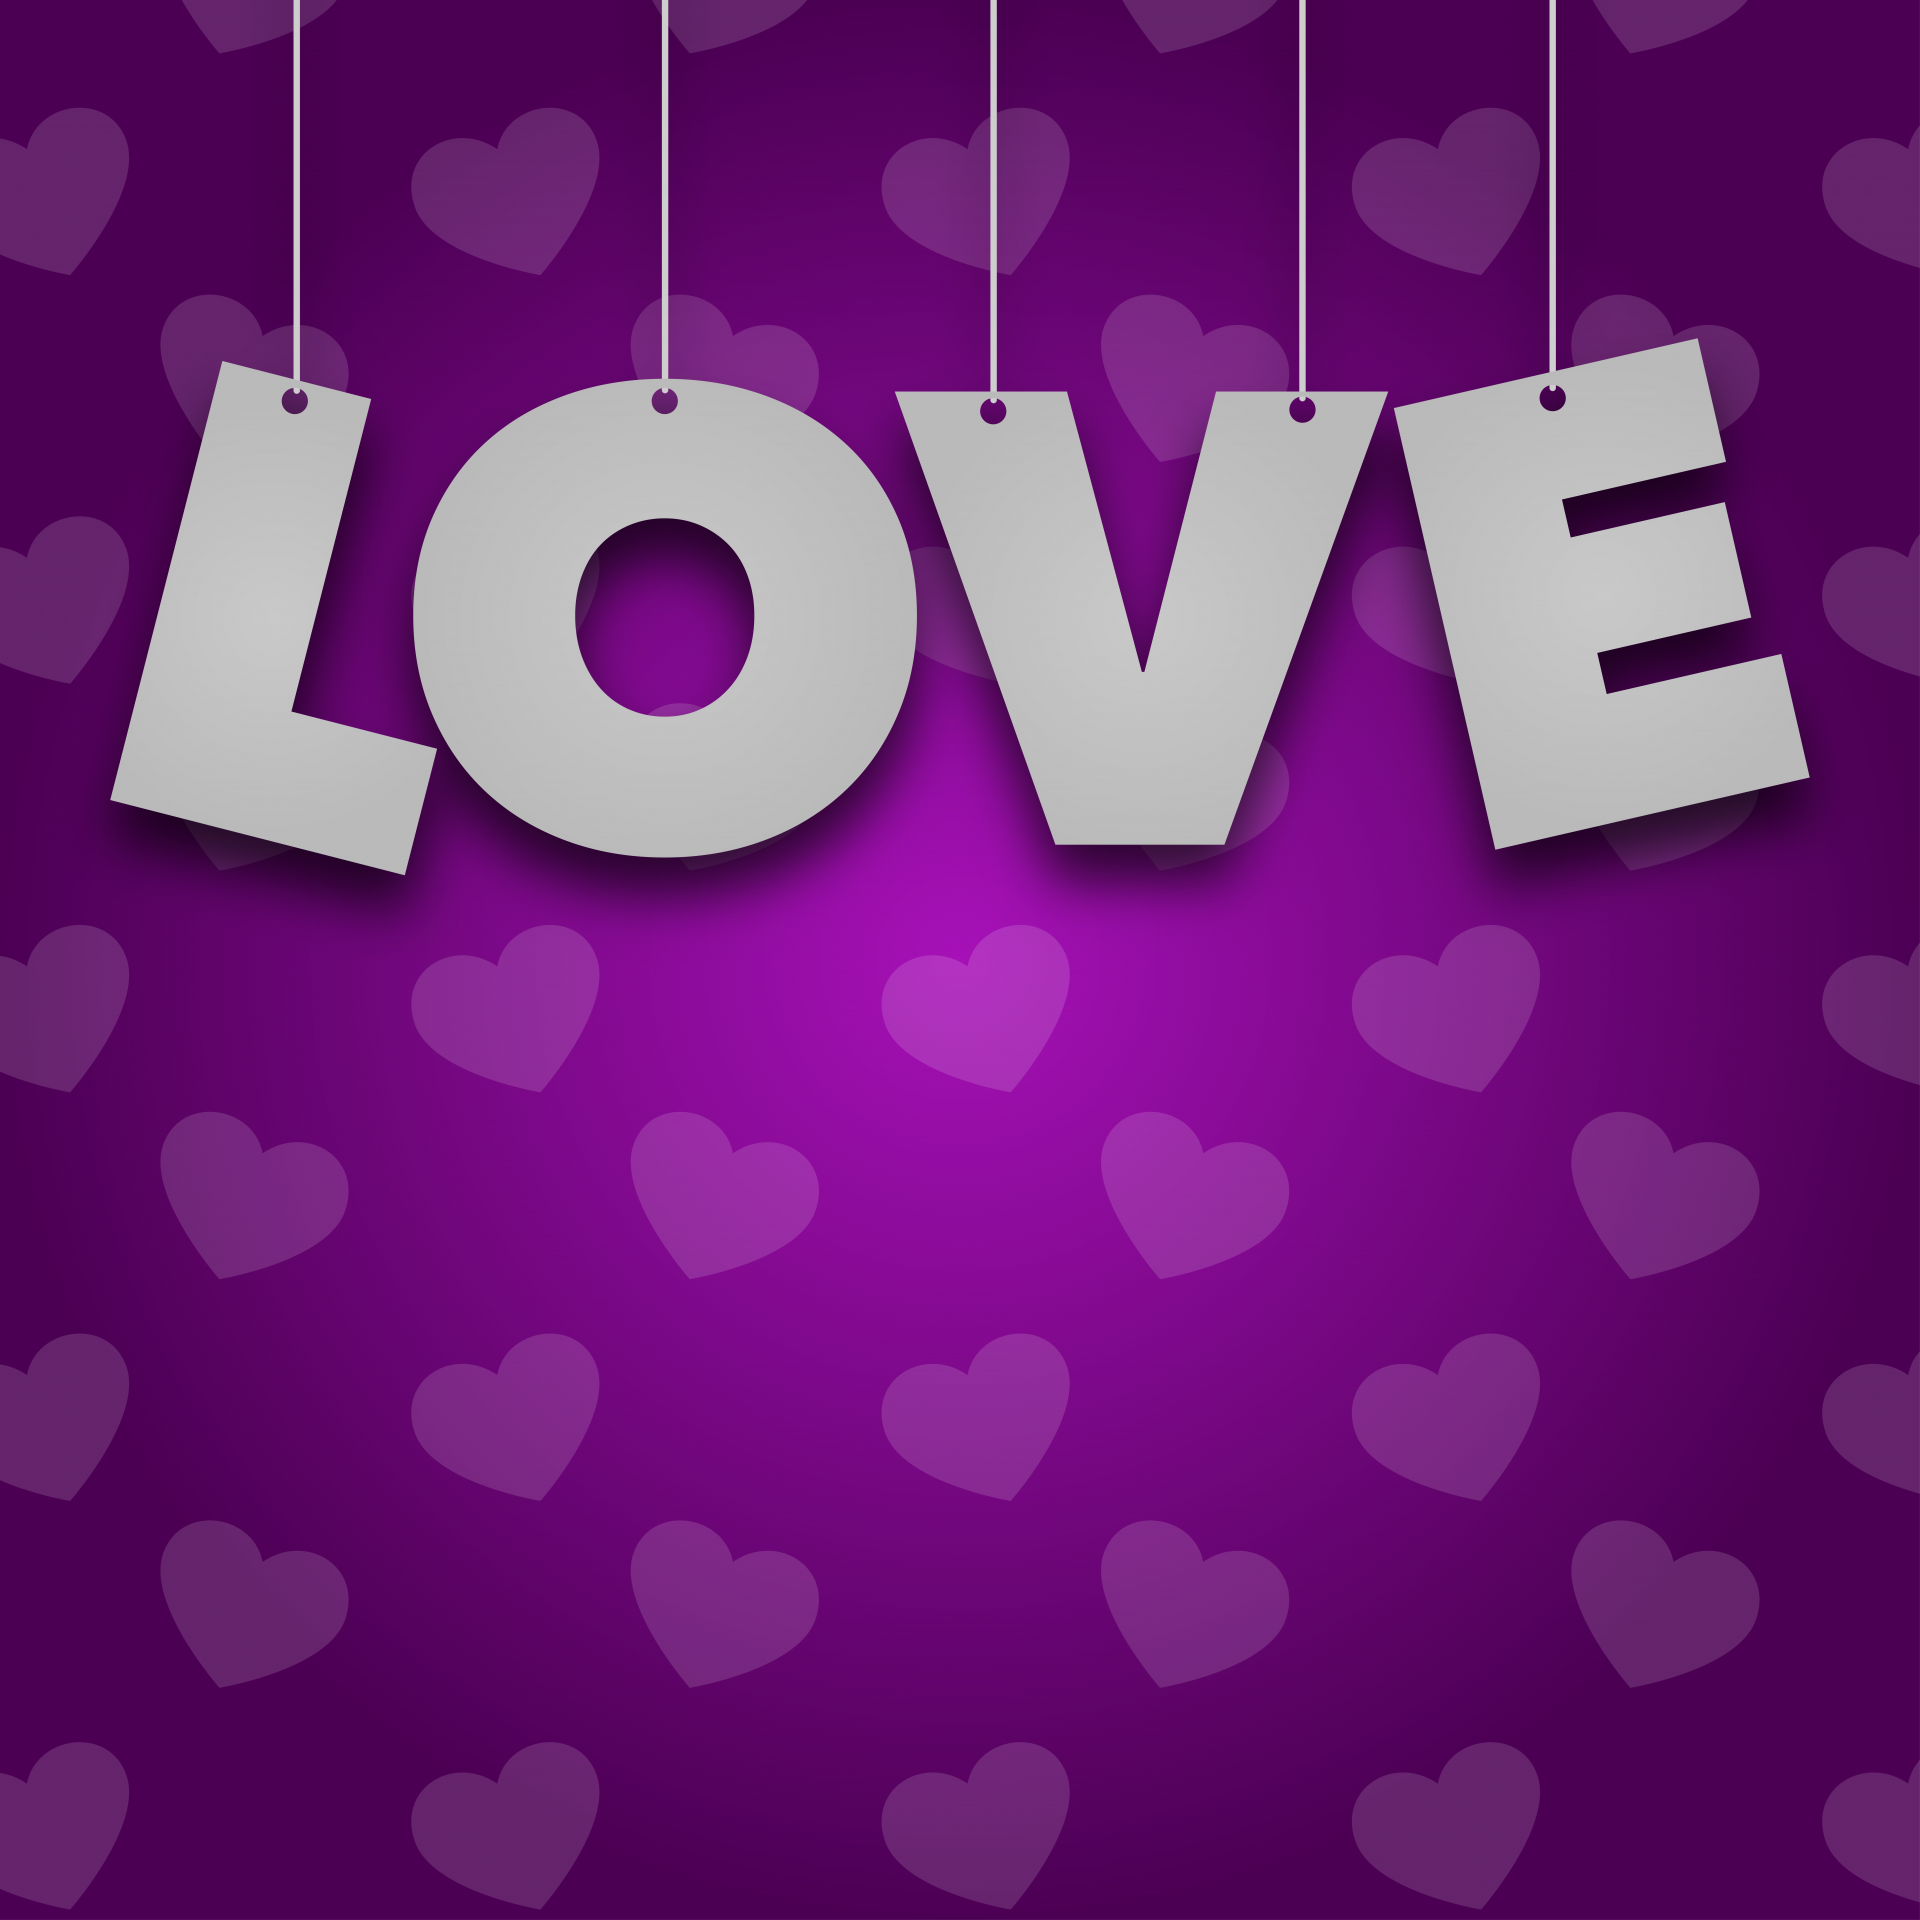 I Love Your Font Design PNG Transparent Background And Clipart Image For Free Download - Lovepik ...